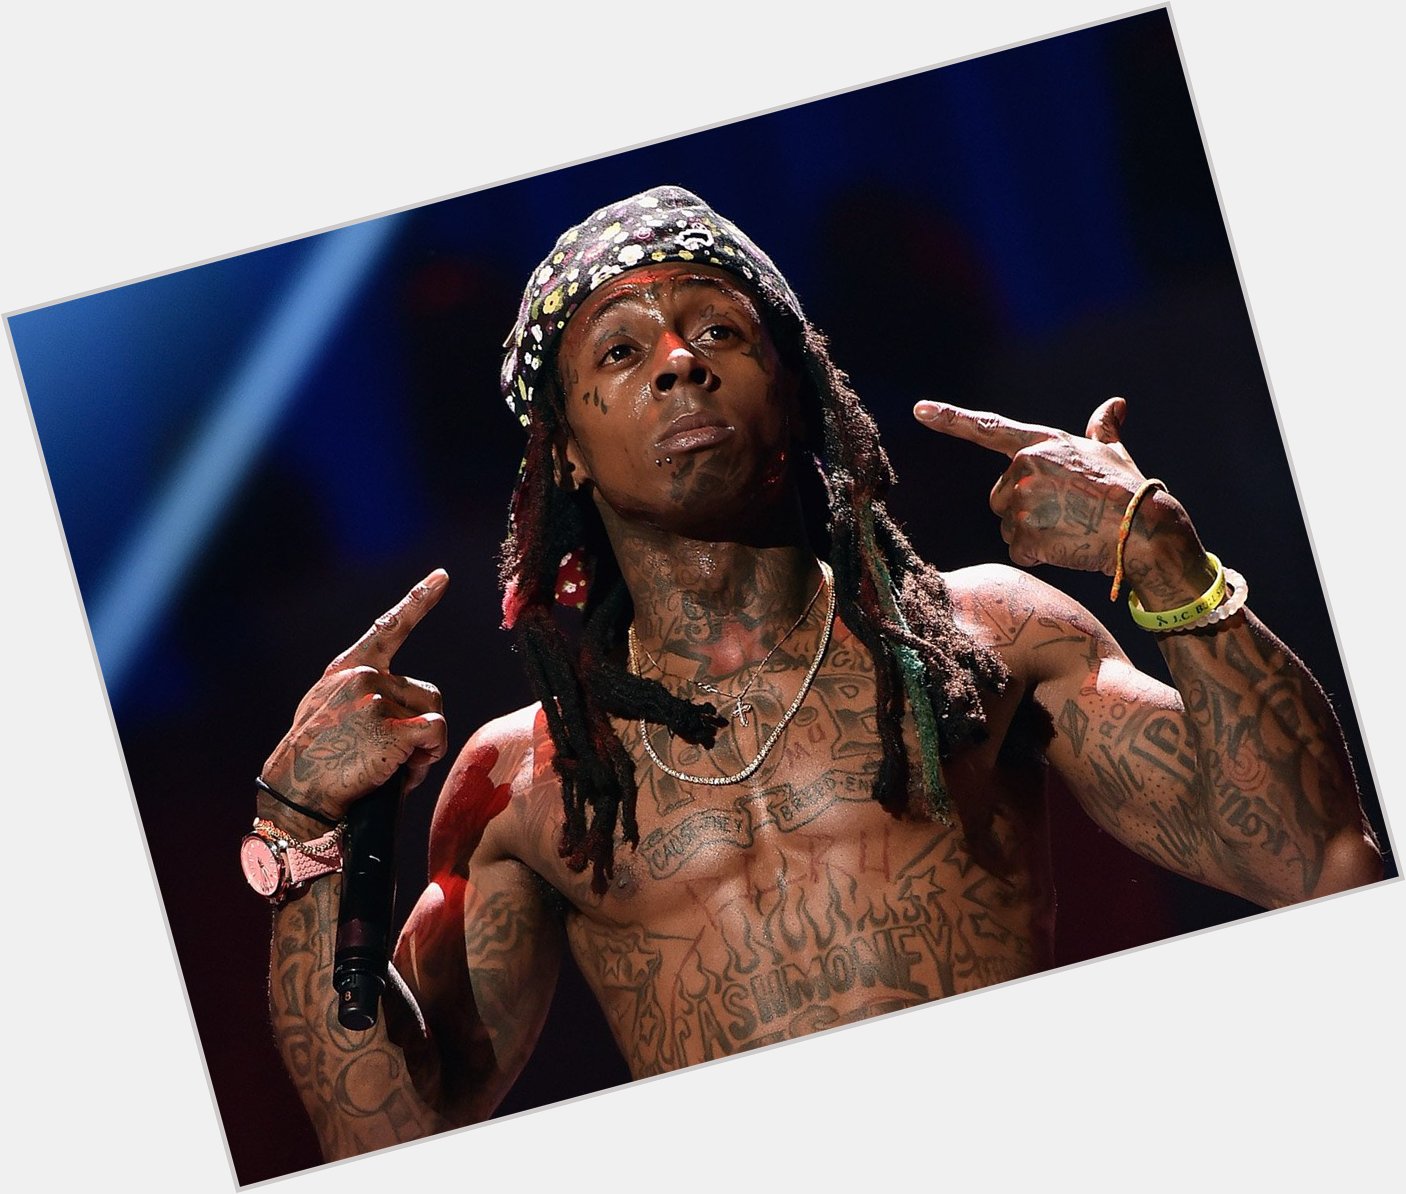 35 years young and still going strong. Happy birthday, Lil Wayne! What\s your favorite project by Weezy F Baby? 